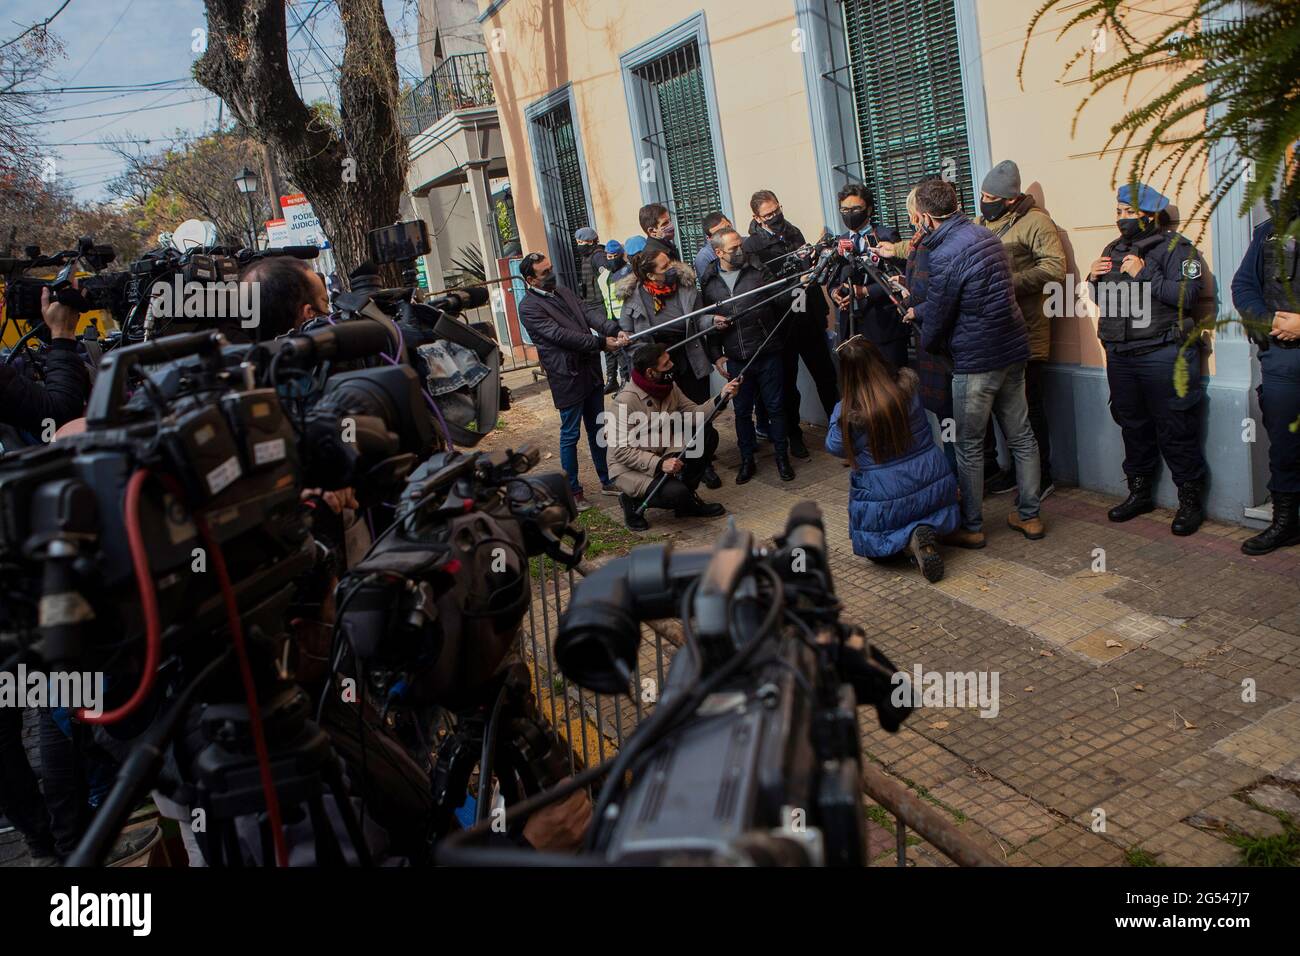 Buenos Aires, Argentina. 25th June, 2021. Vadim Mishanchuk (m., r), lawyer for the psychiatrist Cosakhov in the case on Maradona's death, speaks to journalists outside the prosecutor's office. Prosecutors in San Isidro, north of Buenos Aires, are questioning the Argentine soccer legend's doctors and nurses. Investigators are accusing Maradona's personal physician Luque, psychiatrist Cosachov and several caregivers of manslaughter. Credit: Matias Baglietto/dpa/Alamy Live News Stock Photo